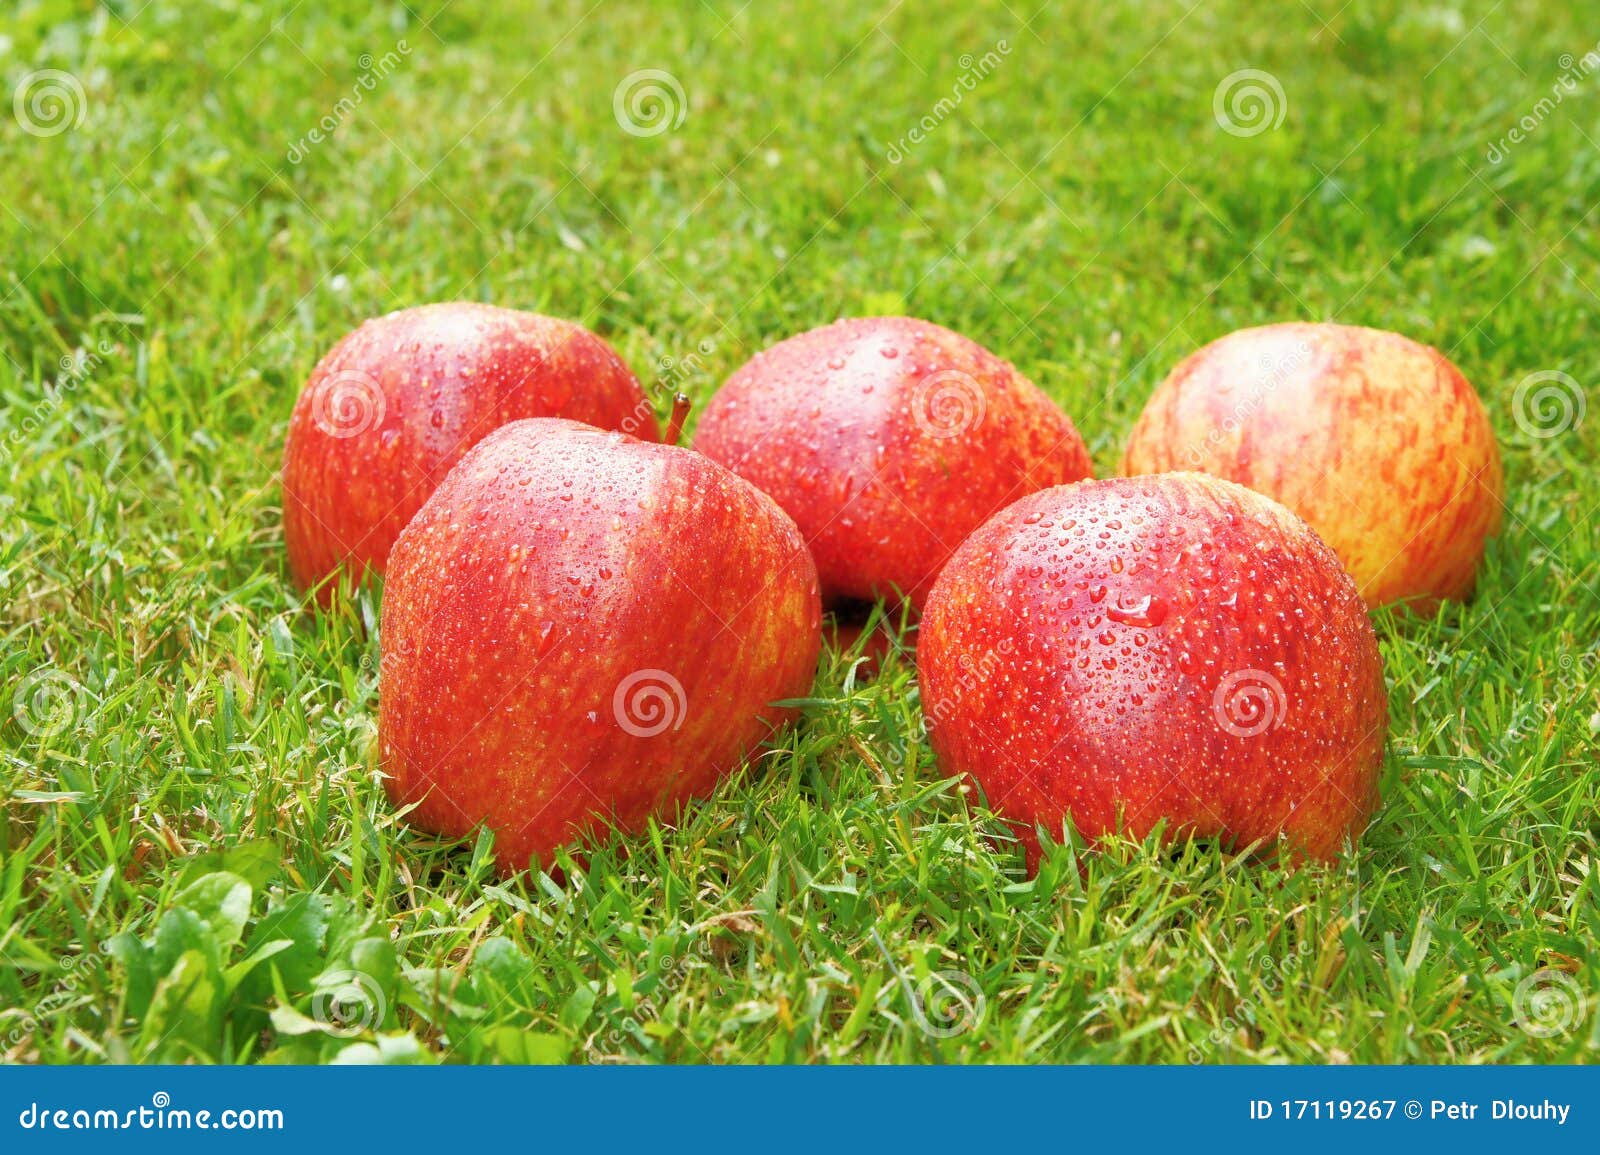 Apple in the grass stock image Image of apple health 17119267